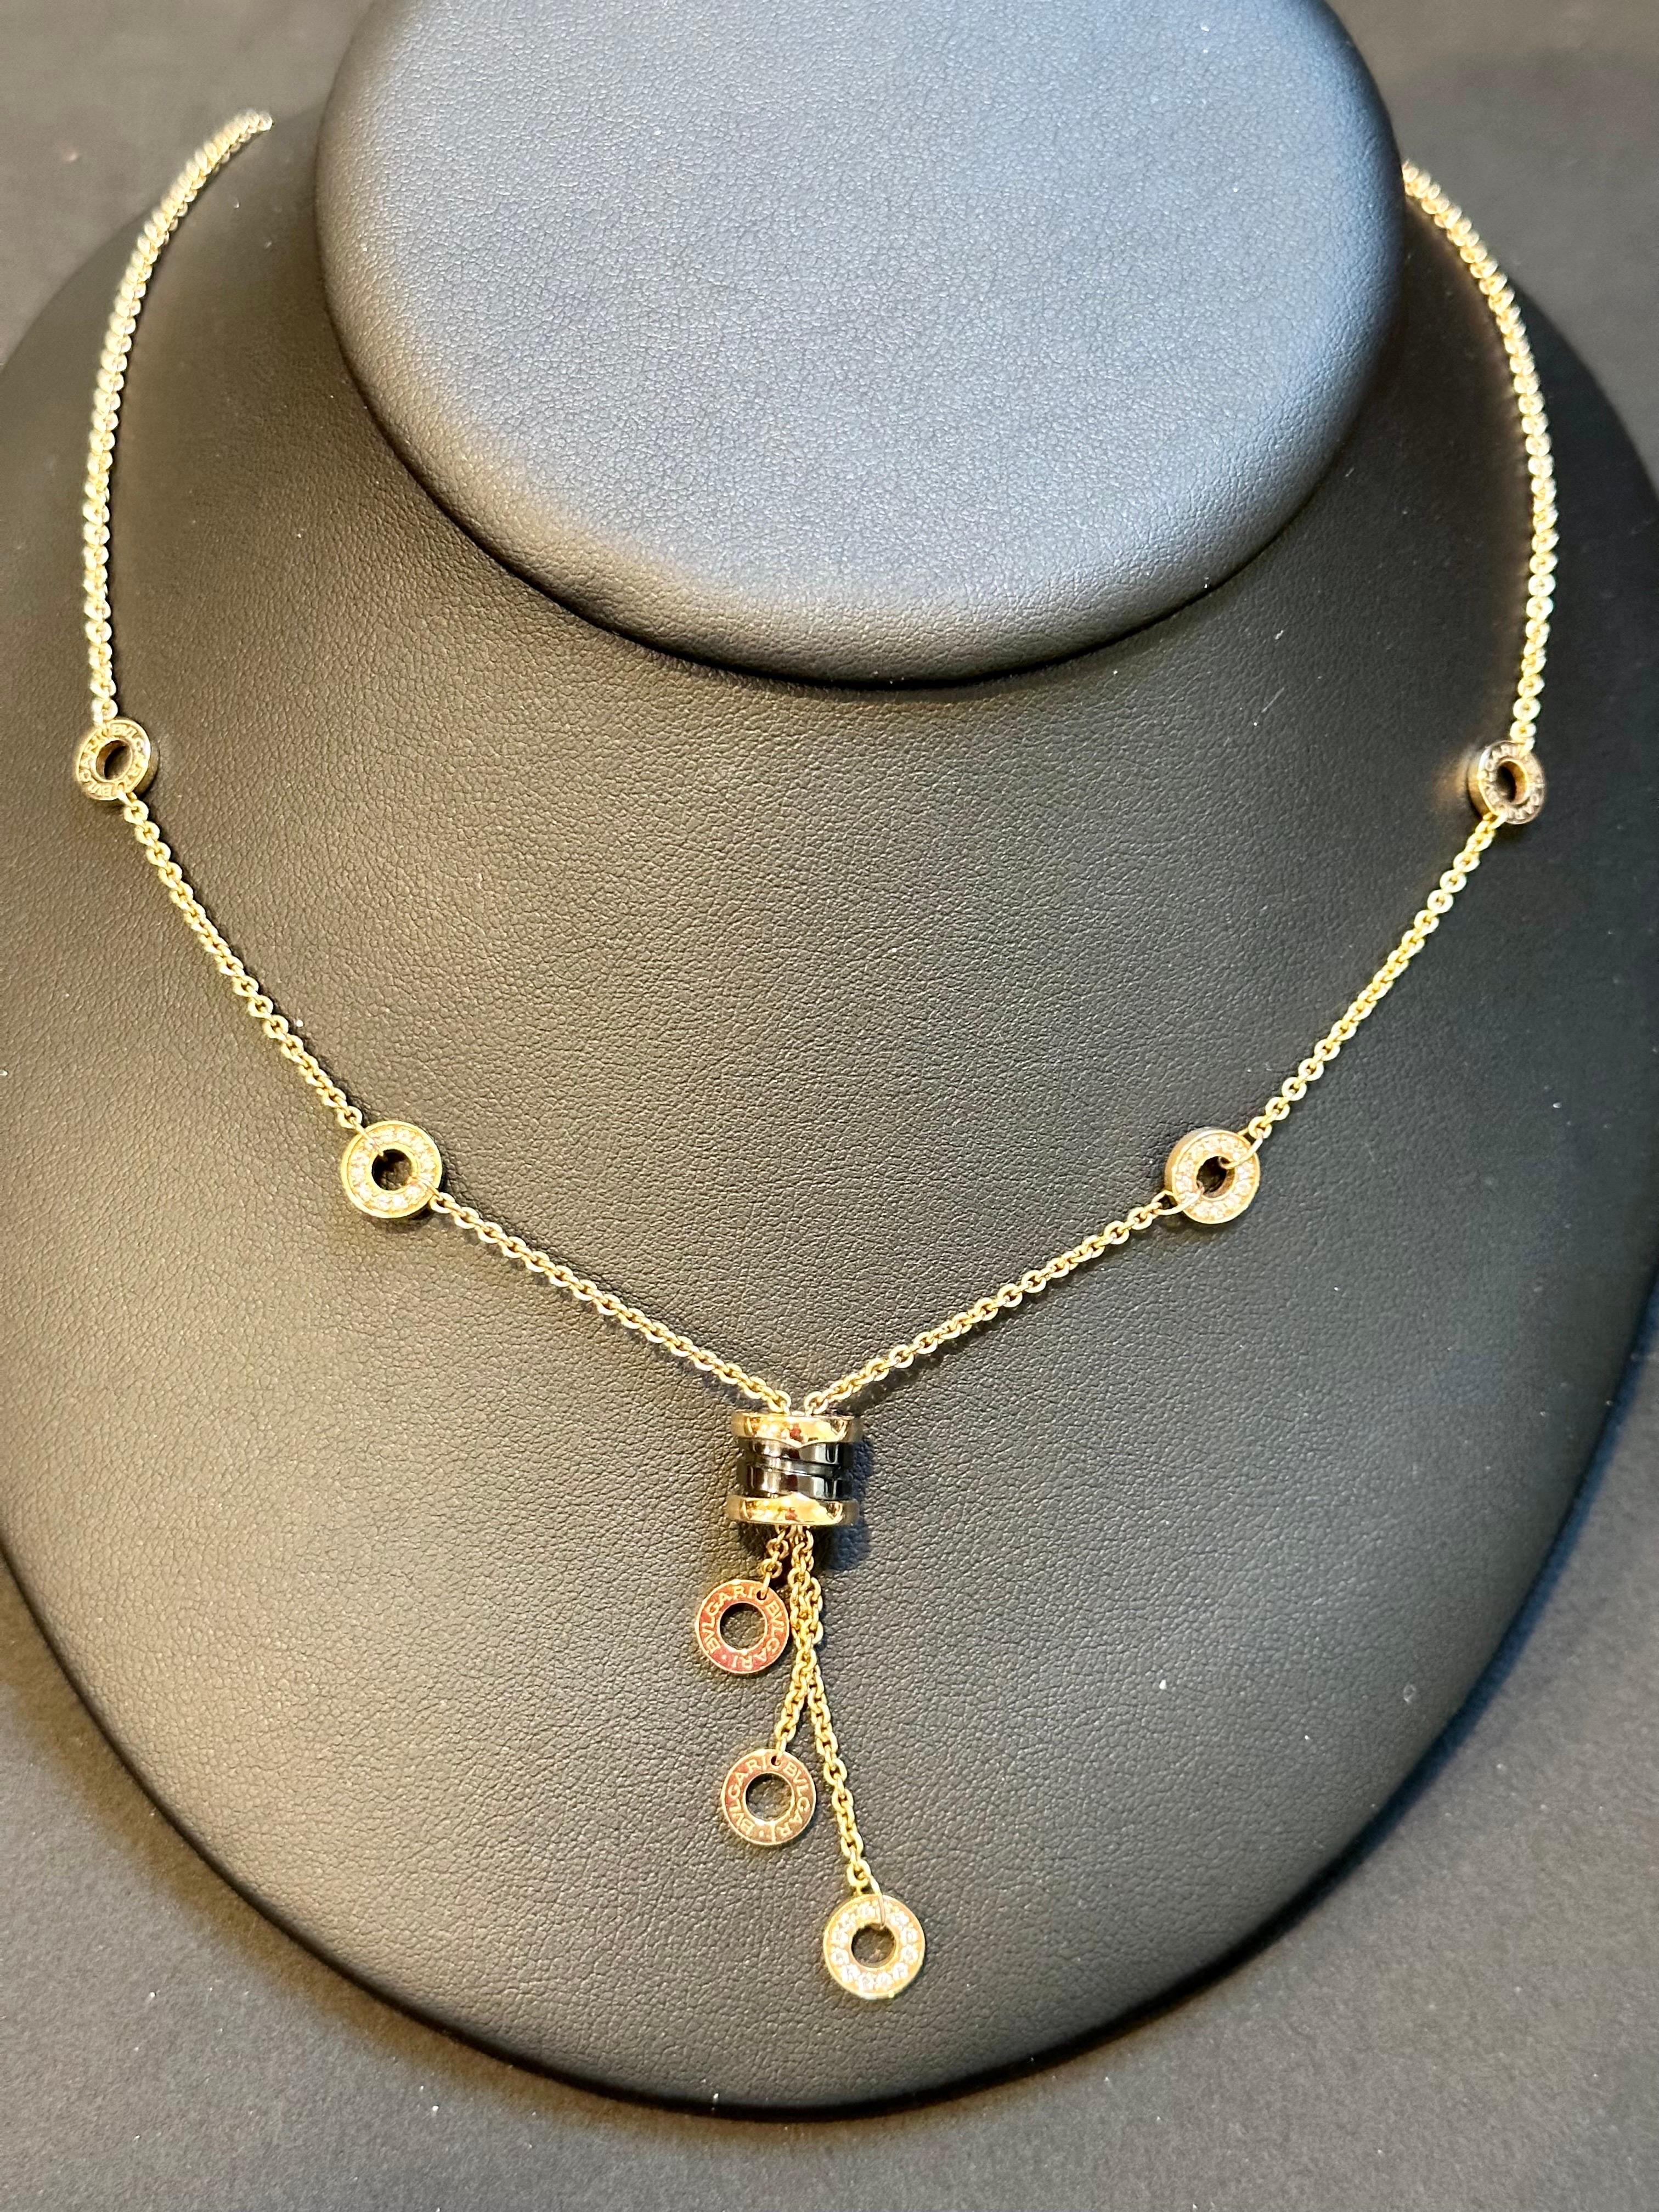 This 18 karat yellow gold BVLGARI BVLGARI necklace is a stunning fusion of ancient Roman roots and contemporary design. The double logo, inspired by inscriptions on ancient coins, has evolved into playful interpretations. Crafted by Bvlgari, this